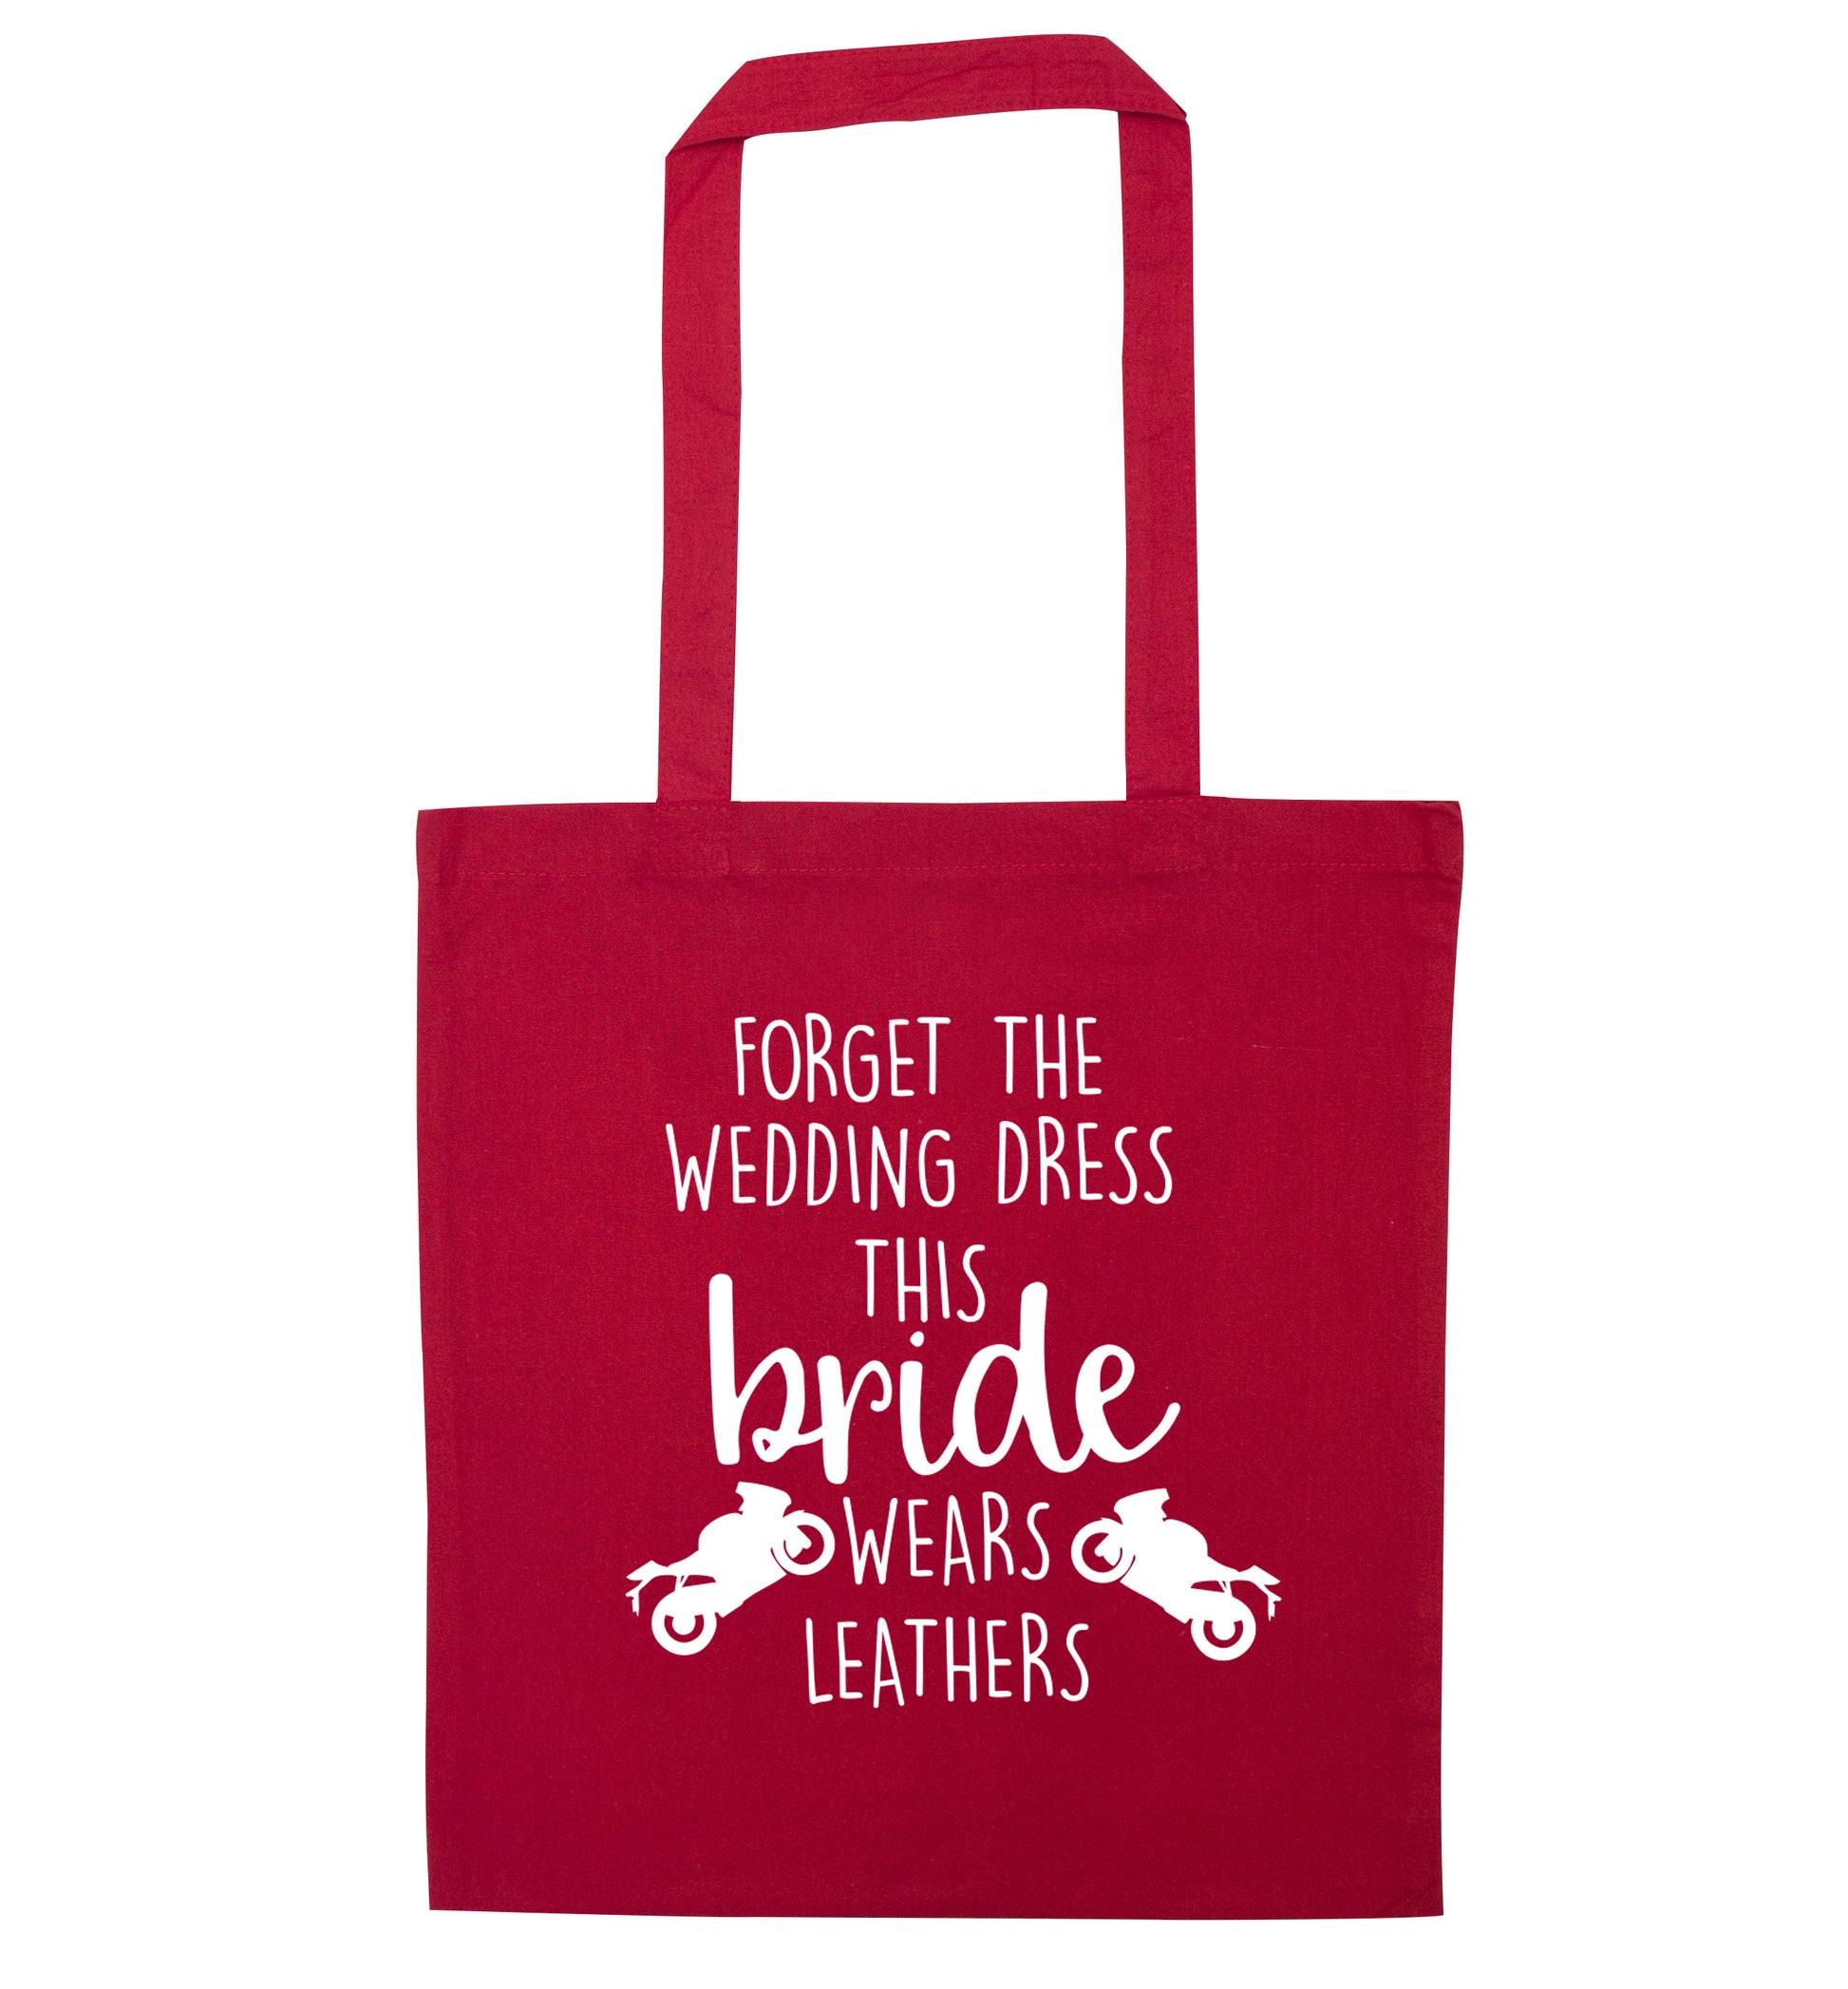 Forget the wedding dress this bride wears leathers red tote bag